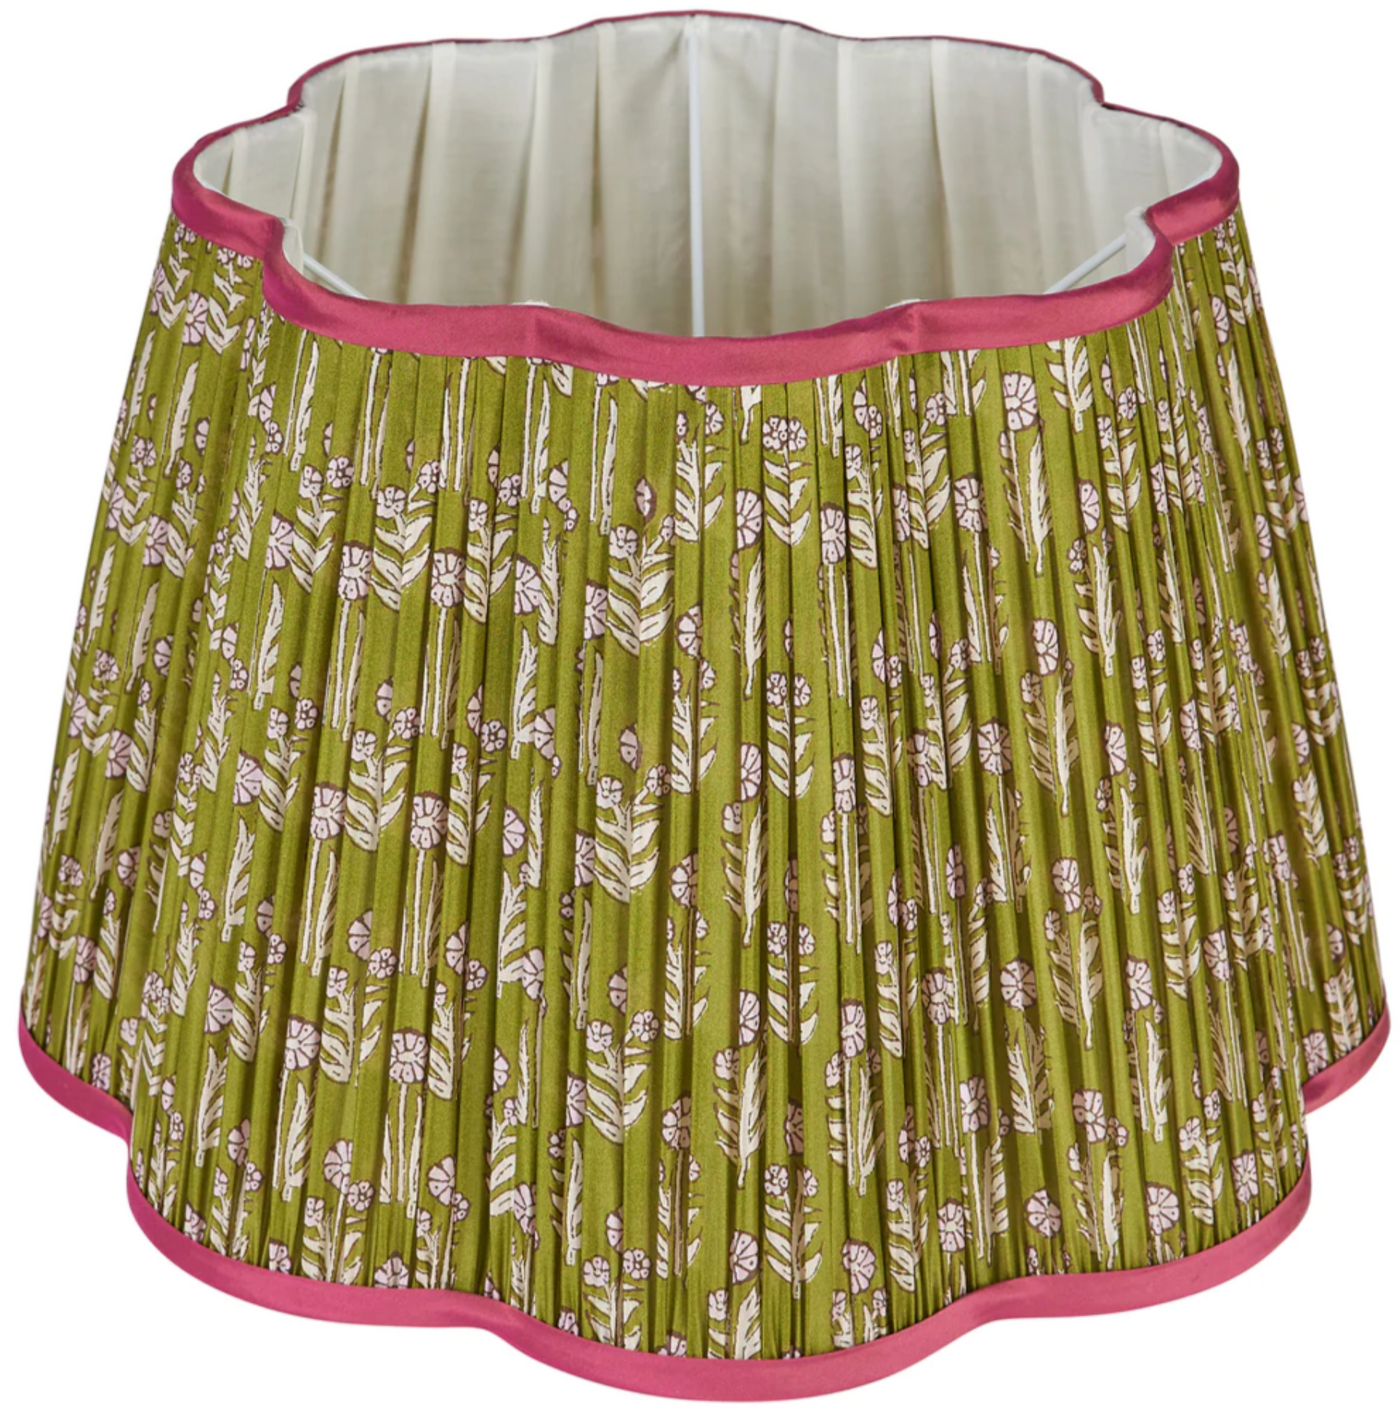 Penny Morrison scalloped lampshade